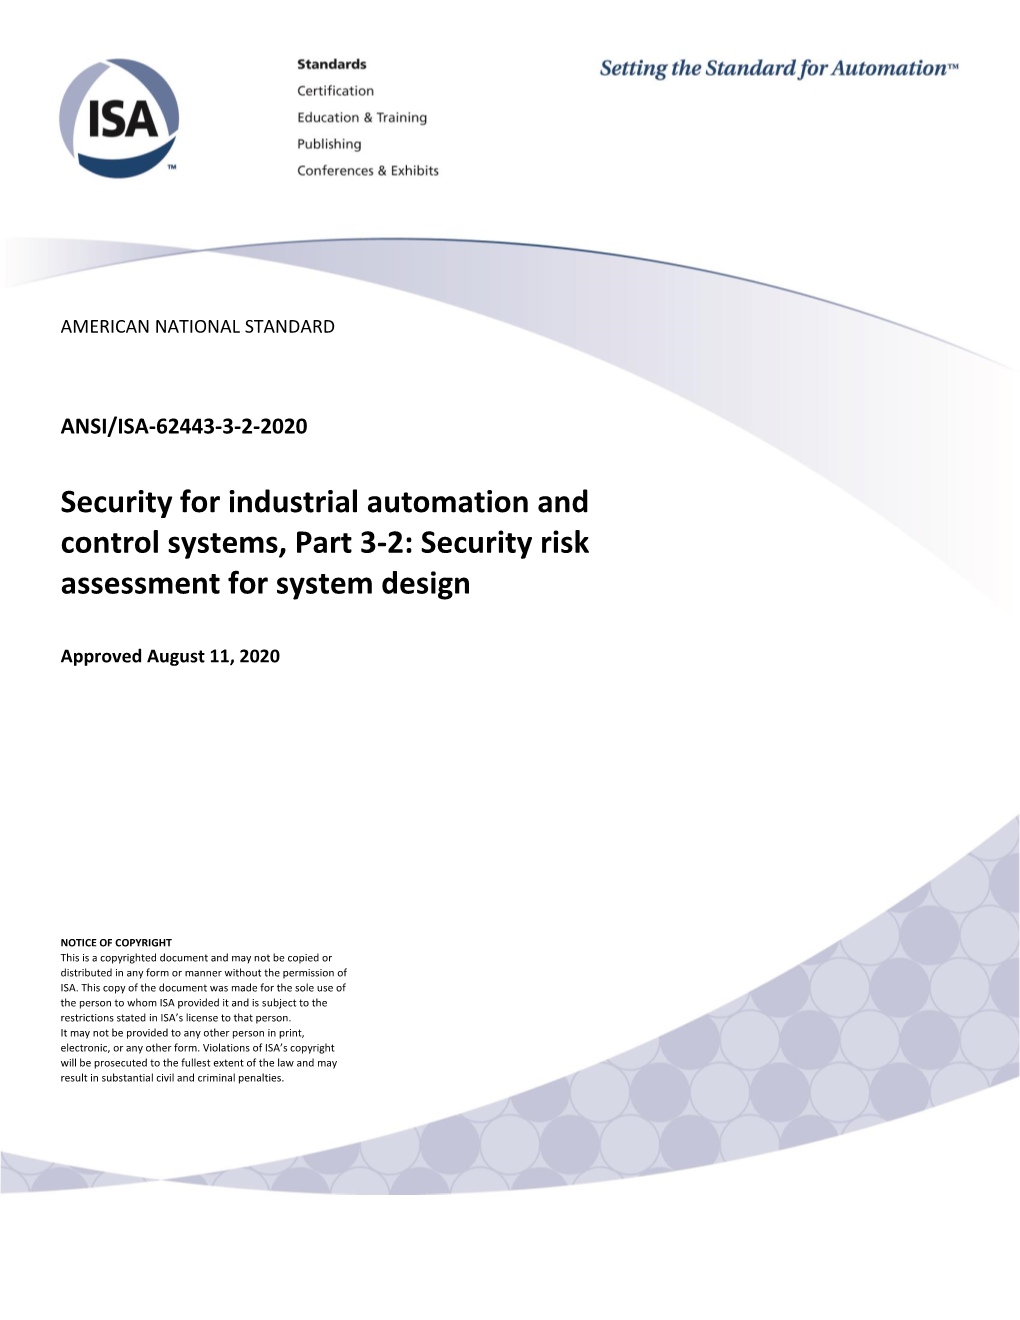 Security for Industrial Automation and Control Systems, Part 3-2: Security Risk Assessment for System Design